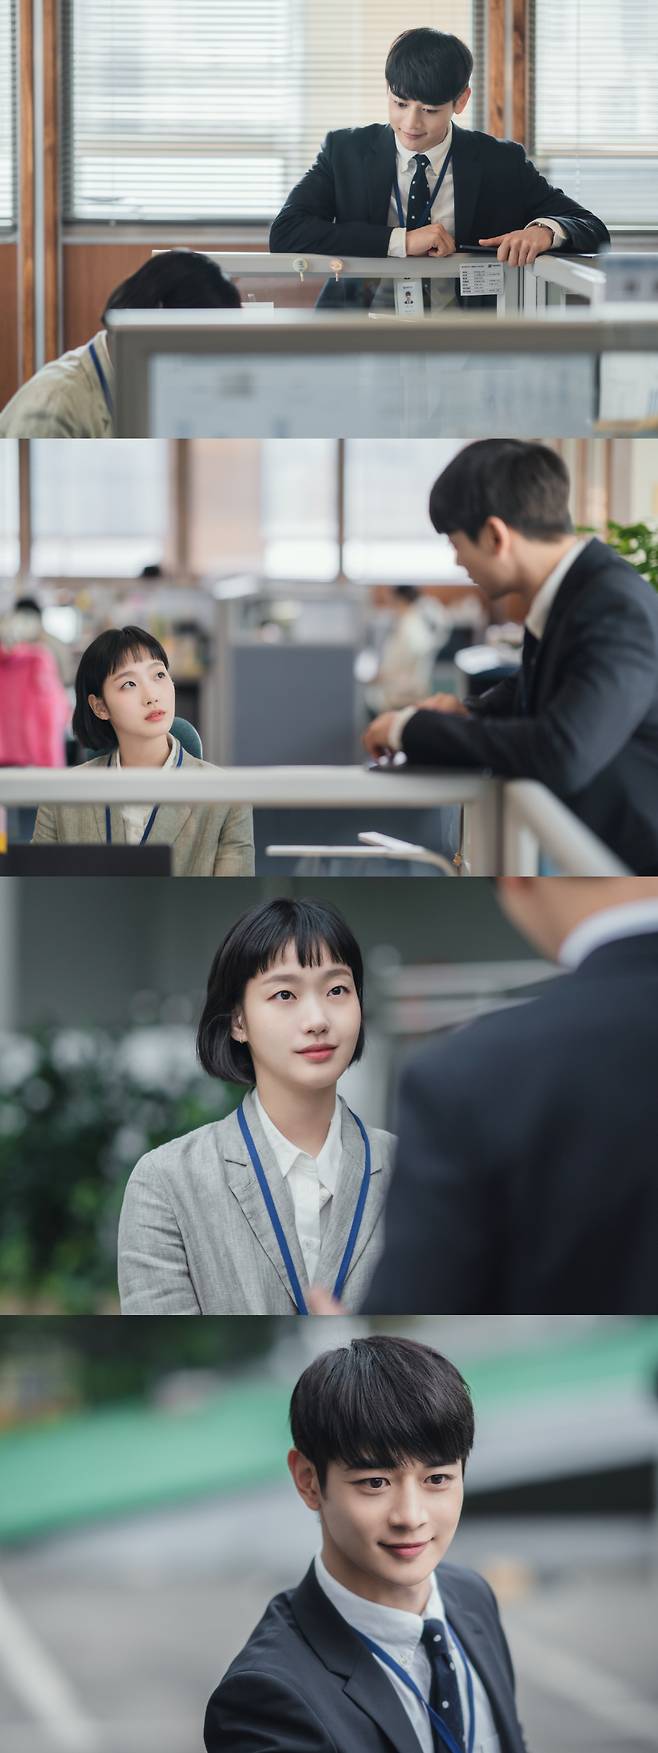 Yumis cells Kim Go-eun is thrilledOn September 17, Tving OLizynal Yumis Cells (played by Kim Yoon-joo Kim Kyung-ran, directed by Lee Sang-yeob, and directed by Creator Song Jae-jong) will be released simultaneously on Tving and TVN on September 17, and Yum, who has a shy smile in front of his junior son Song Yuqi (Choi Min-ho) I reveal the image of Kim Go-eun to raise my curiosity.Choi Min-hos special appearance, which will stimulate excitement, is also hot.The relationship between Yumi and Song Yuqi in the photo released on the day raises questions: Song Yuqi, who sneaked over to Yumi beyond the partition.He is a junior of Yumi, who is attracted to his affection, who causes simkung with a smile alone.Yumis face, which looks at Song Yuqi in the ensuing photo, is full of excitement. Song Yuqi faces Yumi with his friendly eyes, whether he knows or not.I wonder how the cells that have been attacked by Song Yuqis eyes will react.Kim Go-eun, who foresaw another life-cake, unravels a sympathetic story through Yumi.Yumi, a specimen of an ordinary worker, is trapped in a boring routine that can not be found in romance.The only one who gives such a little excitement to Yumi is Song Yuqi, a junior of the company. Song Yuqi, who is as good and friendly as a straight visual, is a popular top in the company.Song Yuqi, who makes everyone who encounters inhabit, stimulates curiosity about how to get involved with Yumi.Choi Min-ho, who is well-melted in the character, adds his own color to complete the charming man Song Yuqi.Choi Min-ho said, I wanted to be together in the sense that the work famous for Webtoon is real. Song Yuqi is a colleague who is always a force for Yumi, hard at work, exemplary and pure person. If you look at the activities of cute cells, the hot performances of actors, and the harmony of them, you will be able to enjoy the drama more vividly.I hope you will heal with Yumis cells this fall. Yumis cells, which are produced as a season, are cell-stimulating empathy romances that depict the story of ordinary Yumi who eats, loves and grows with cells.It is produced in a format that combines the first live-action of domestic dramas with 3D animation, and it is expected to have different fun.Lee Sang-yeob, who showed sensual production with Shopping King Louis and Knowing Wife, catches megaphone and guarantees perfection.Song Jae-jong, who is trusted with his original and solid writings such as Memories of the Palace of Alhambra and W (W), participated as a creator, and Kim Yoon-joo and Kim Kyung-ran, who were greatly loved through The Mans Memory and Twenty Years Old, wrote.Tving OLizzyn Yumis cells will be released simultaneously on September 17 at 10:50 pm on Tving and tvN.